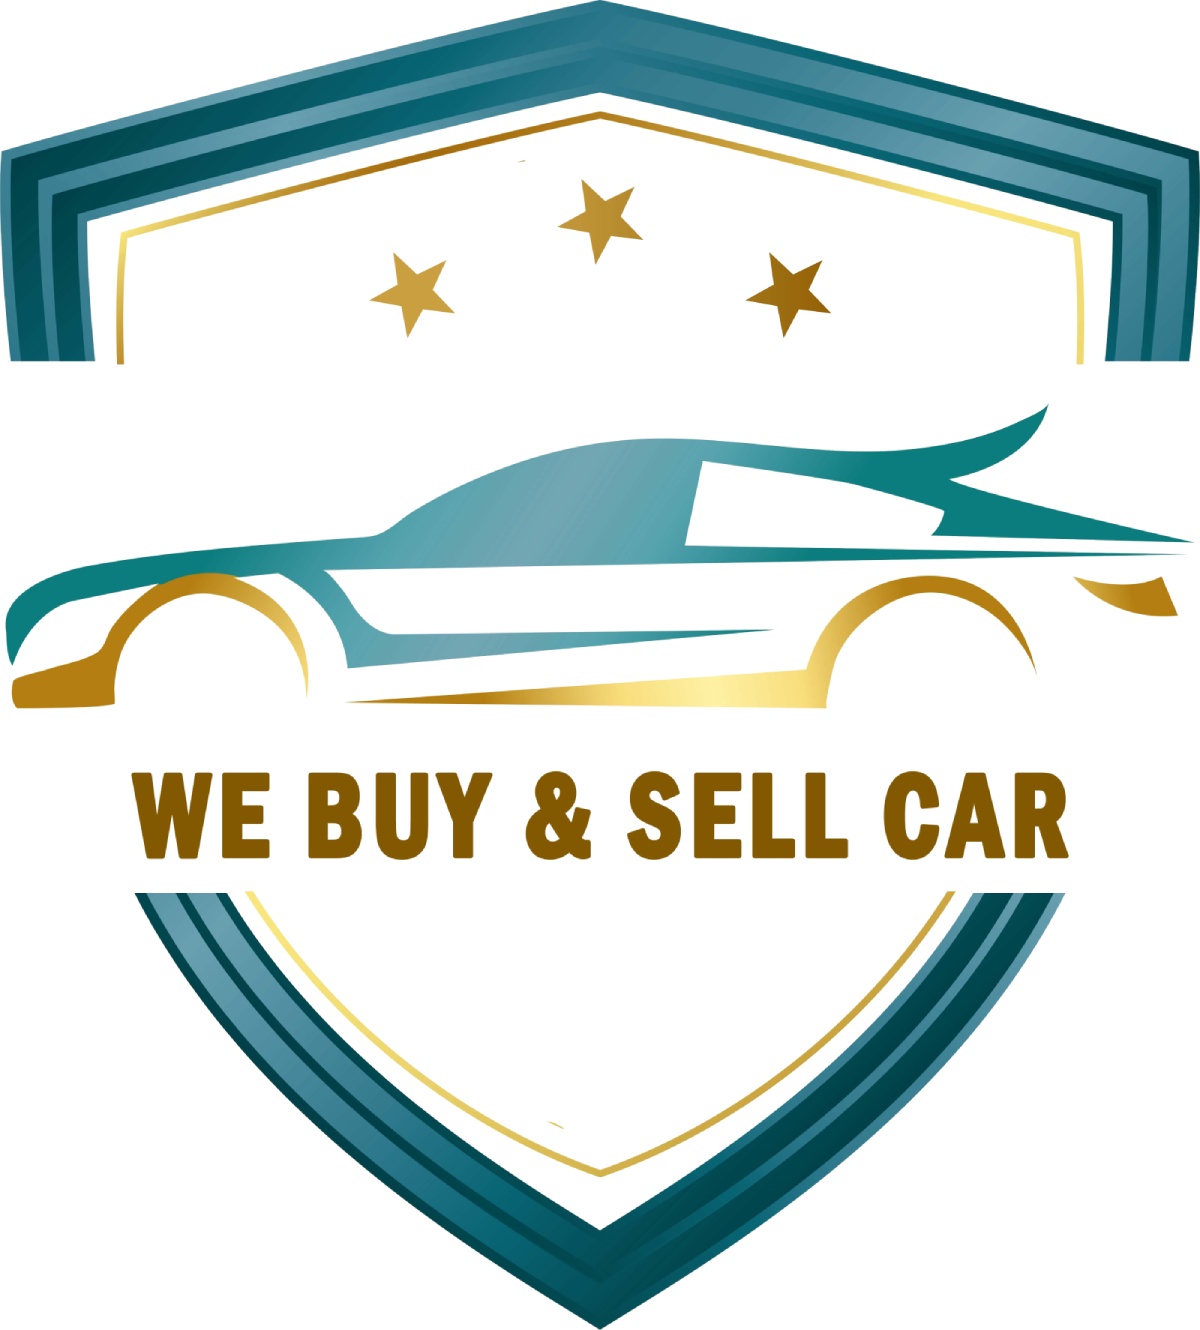 We Buy and Sell Car Inspection and Assessment LLC Logo